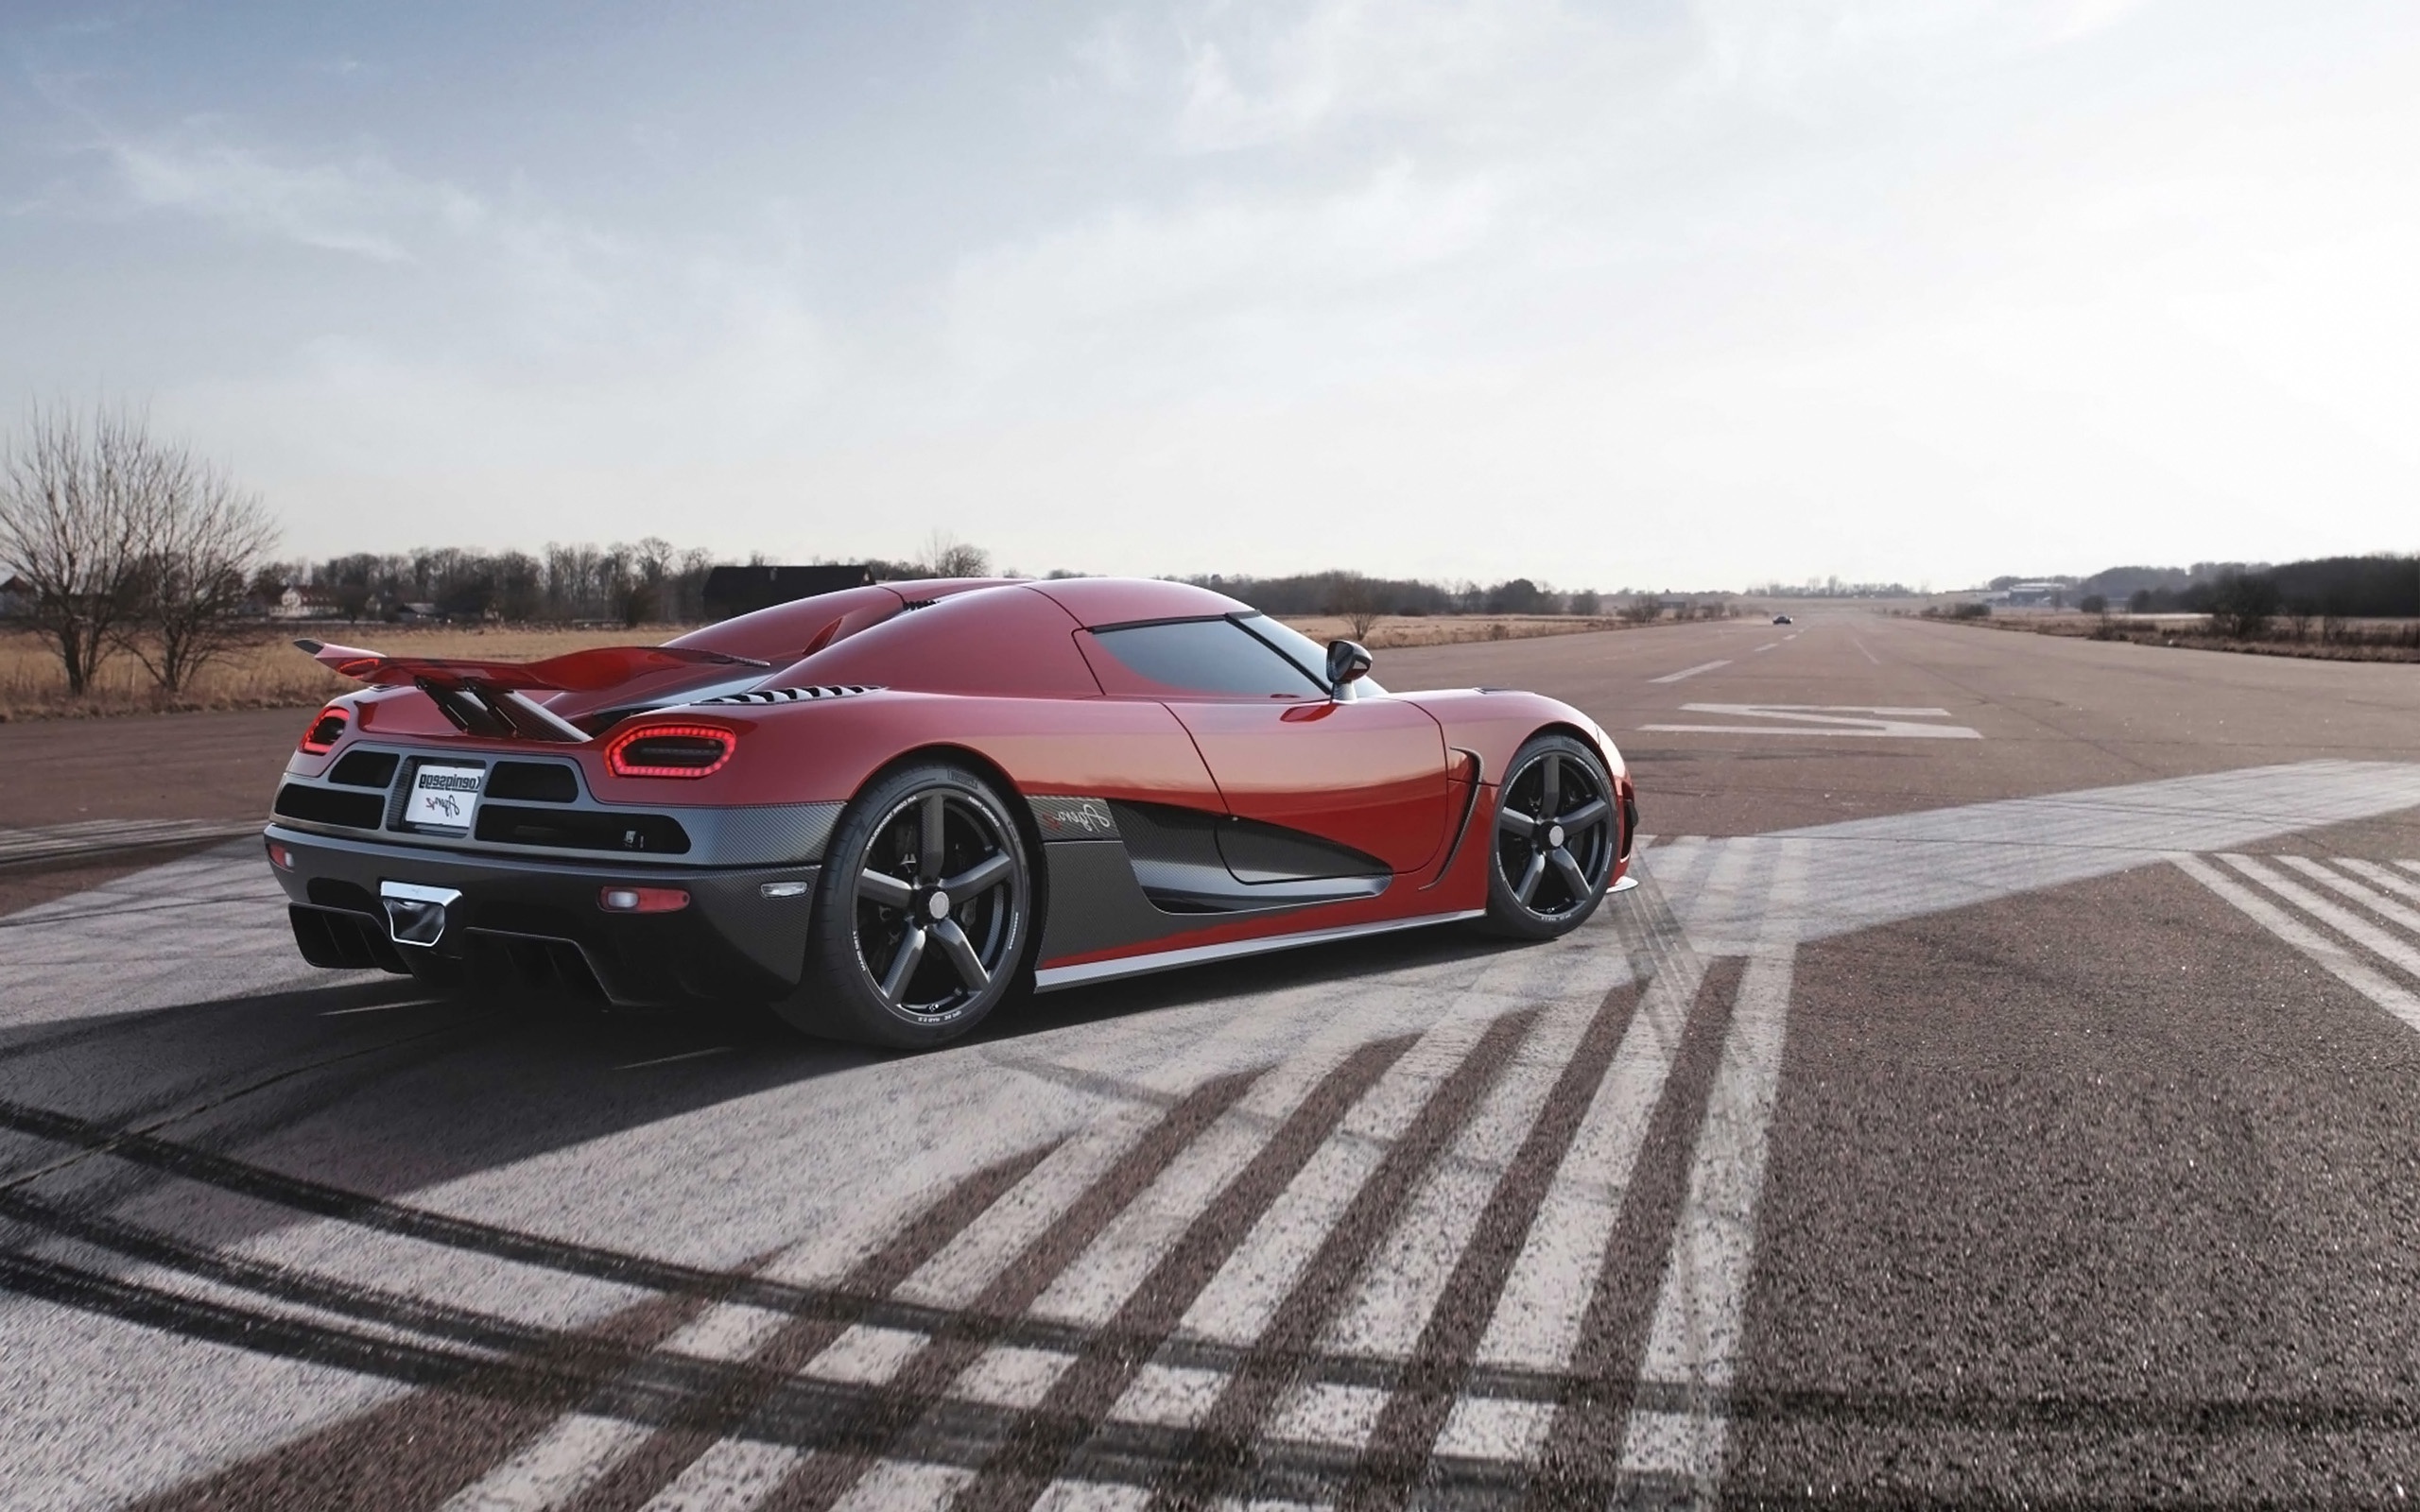 Koenigsegg Agera R, Red and black, Popular wallpapers, Backgrounds, 2560x1600 HD Desktop